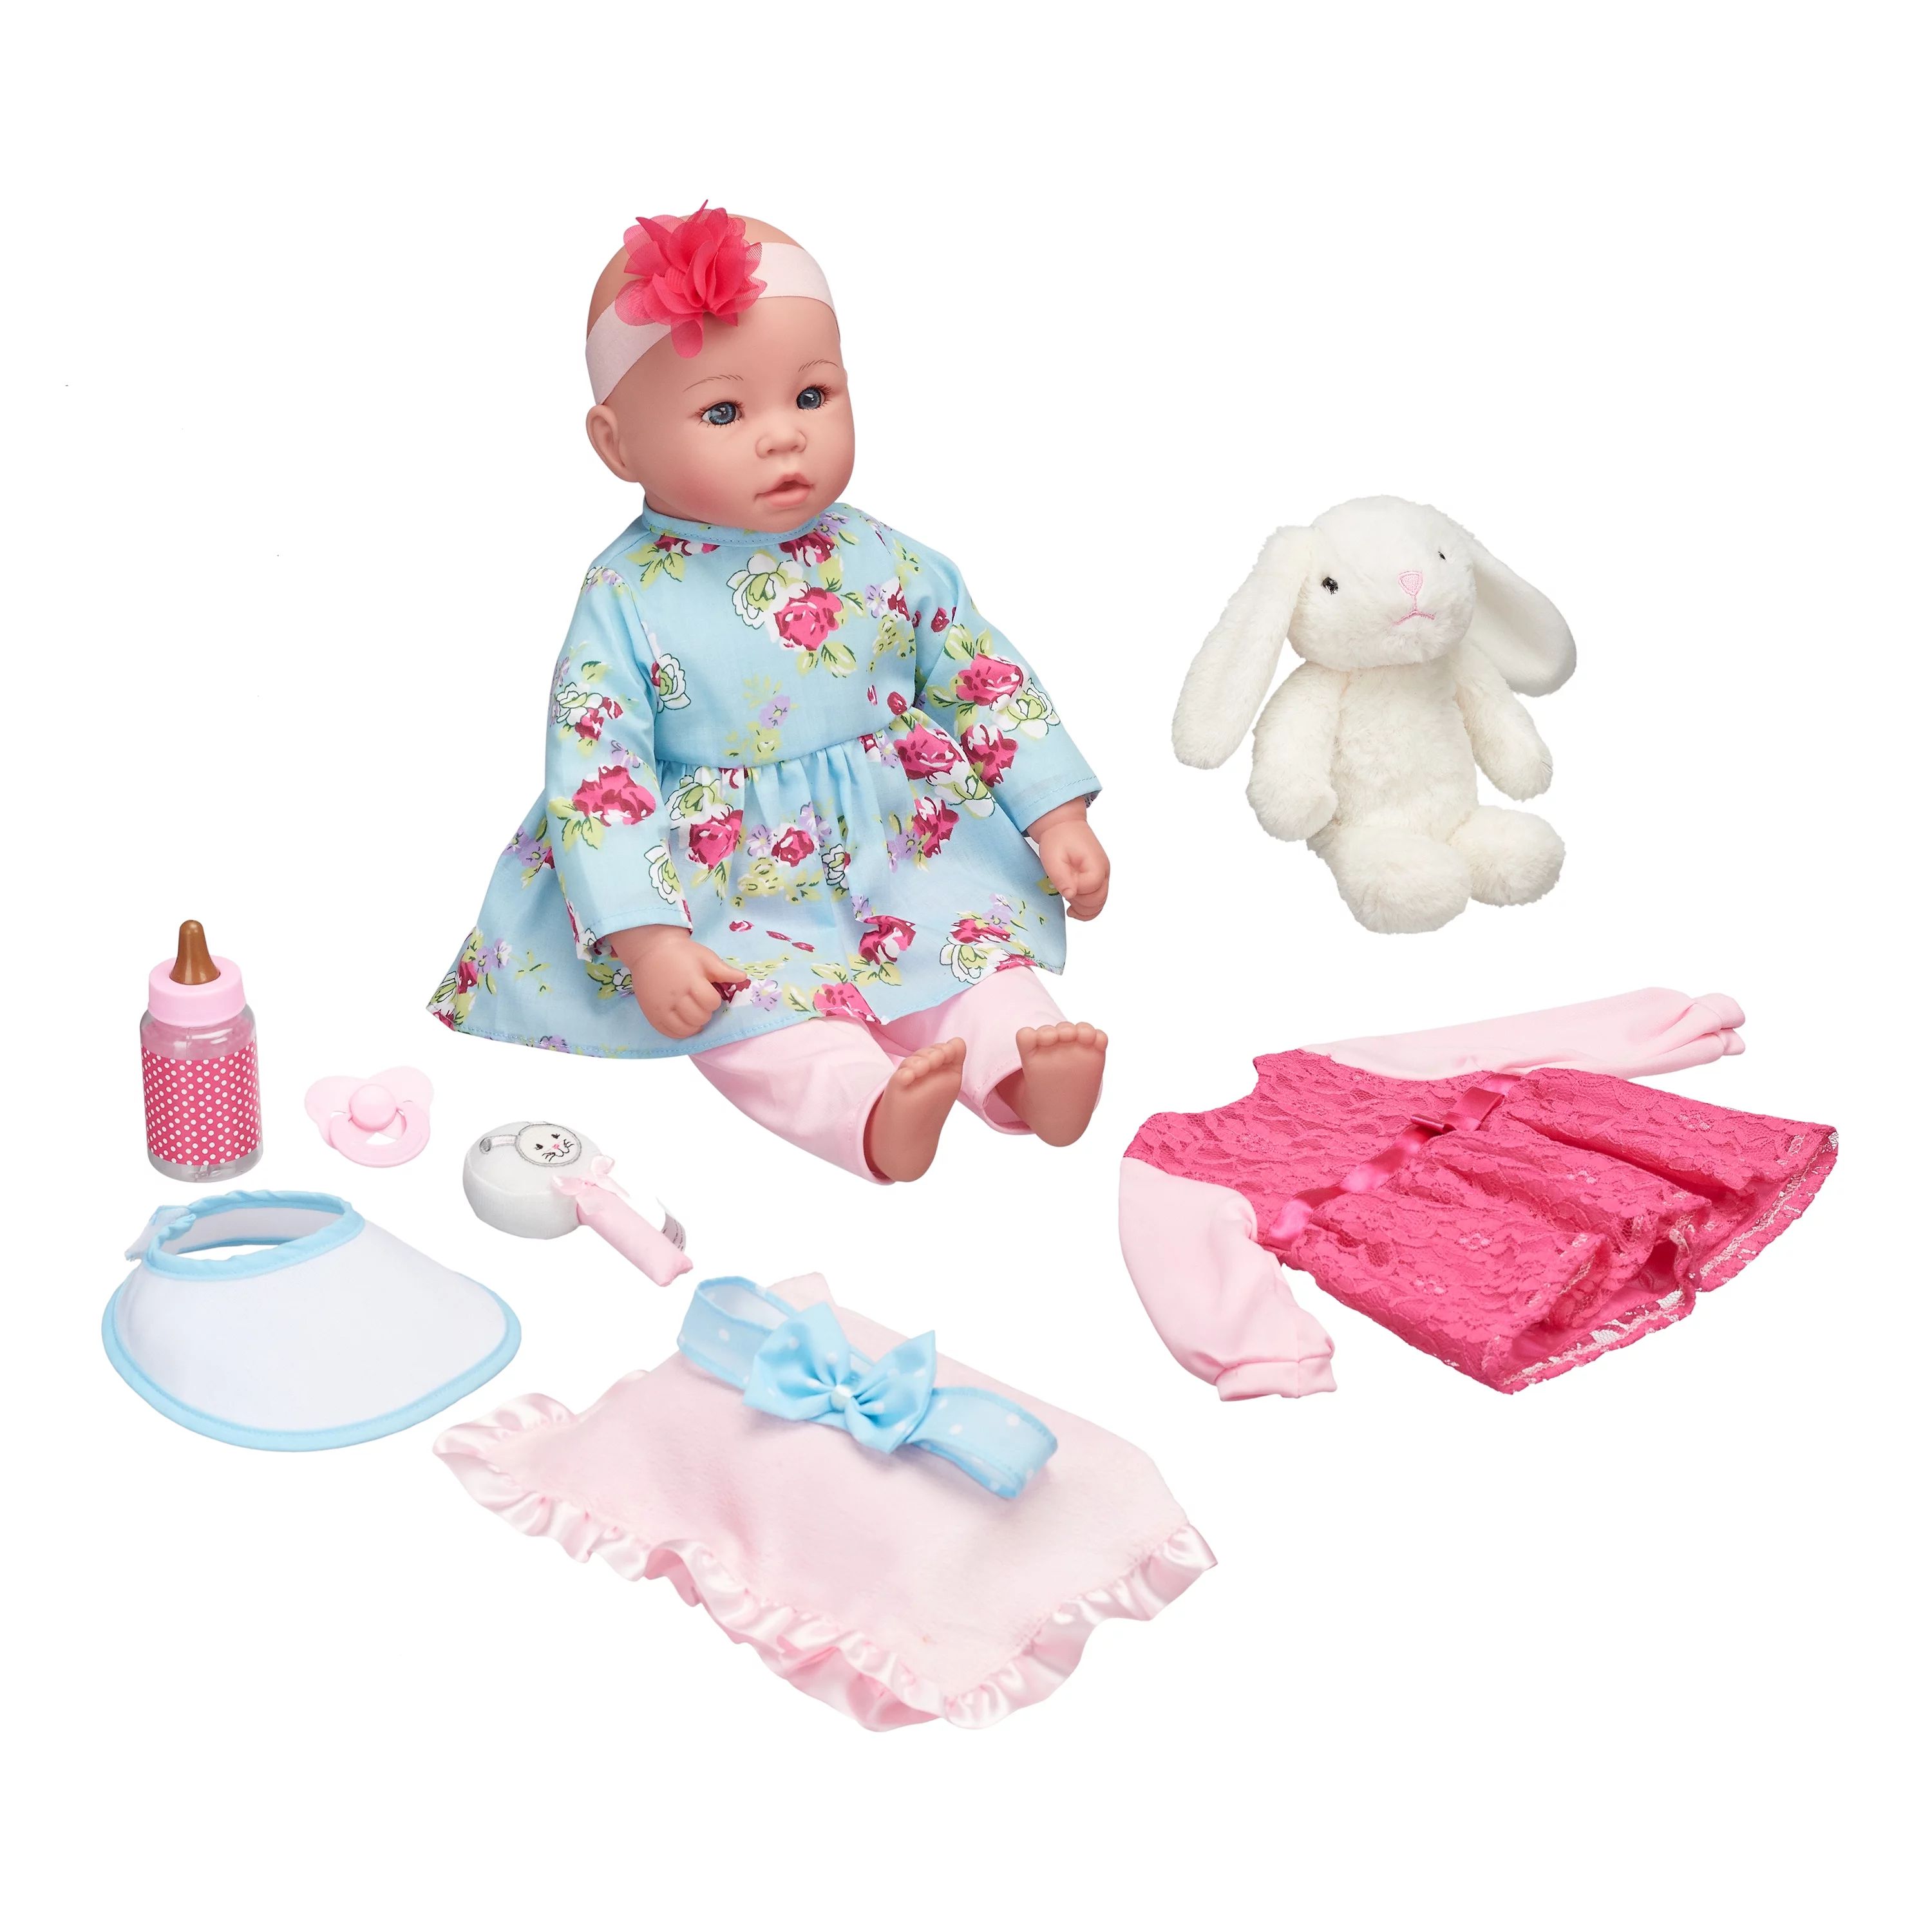 My Sweet Love 18" Doll and Accessories Set with Plush Bunny - Walmart.com | Walmart (US)